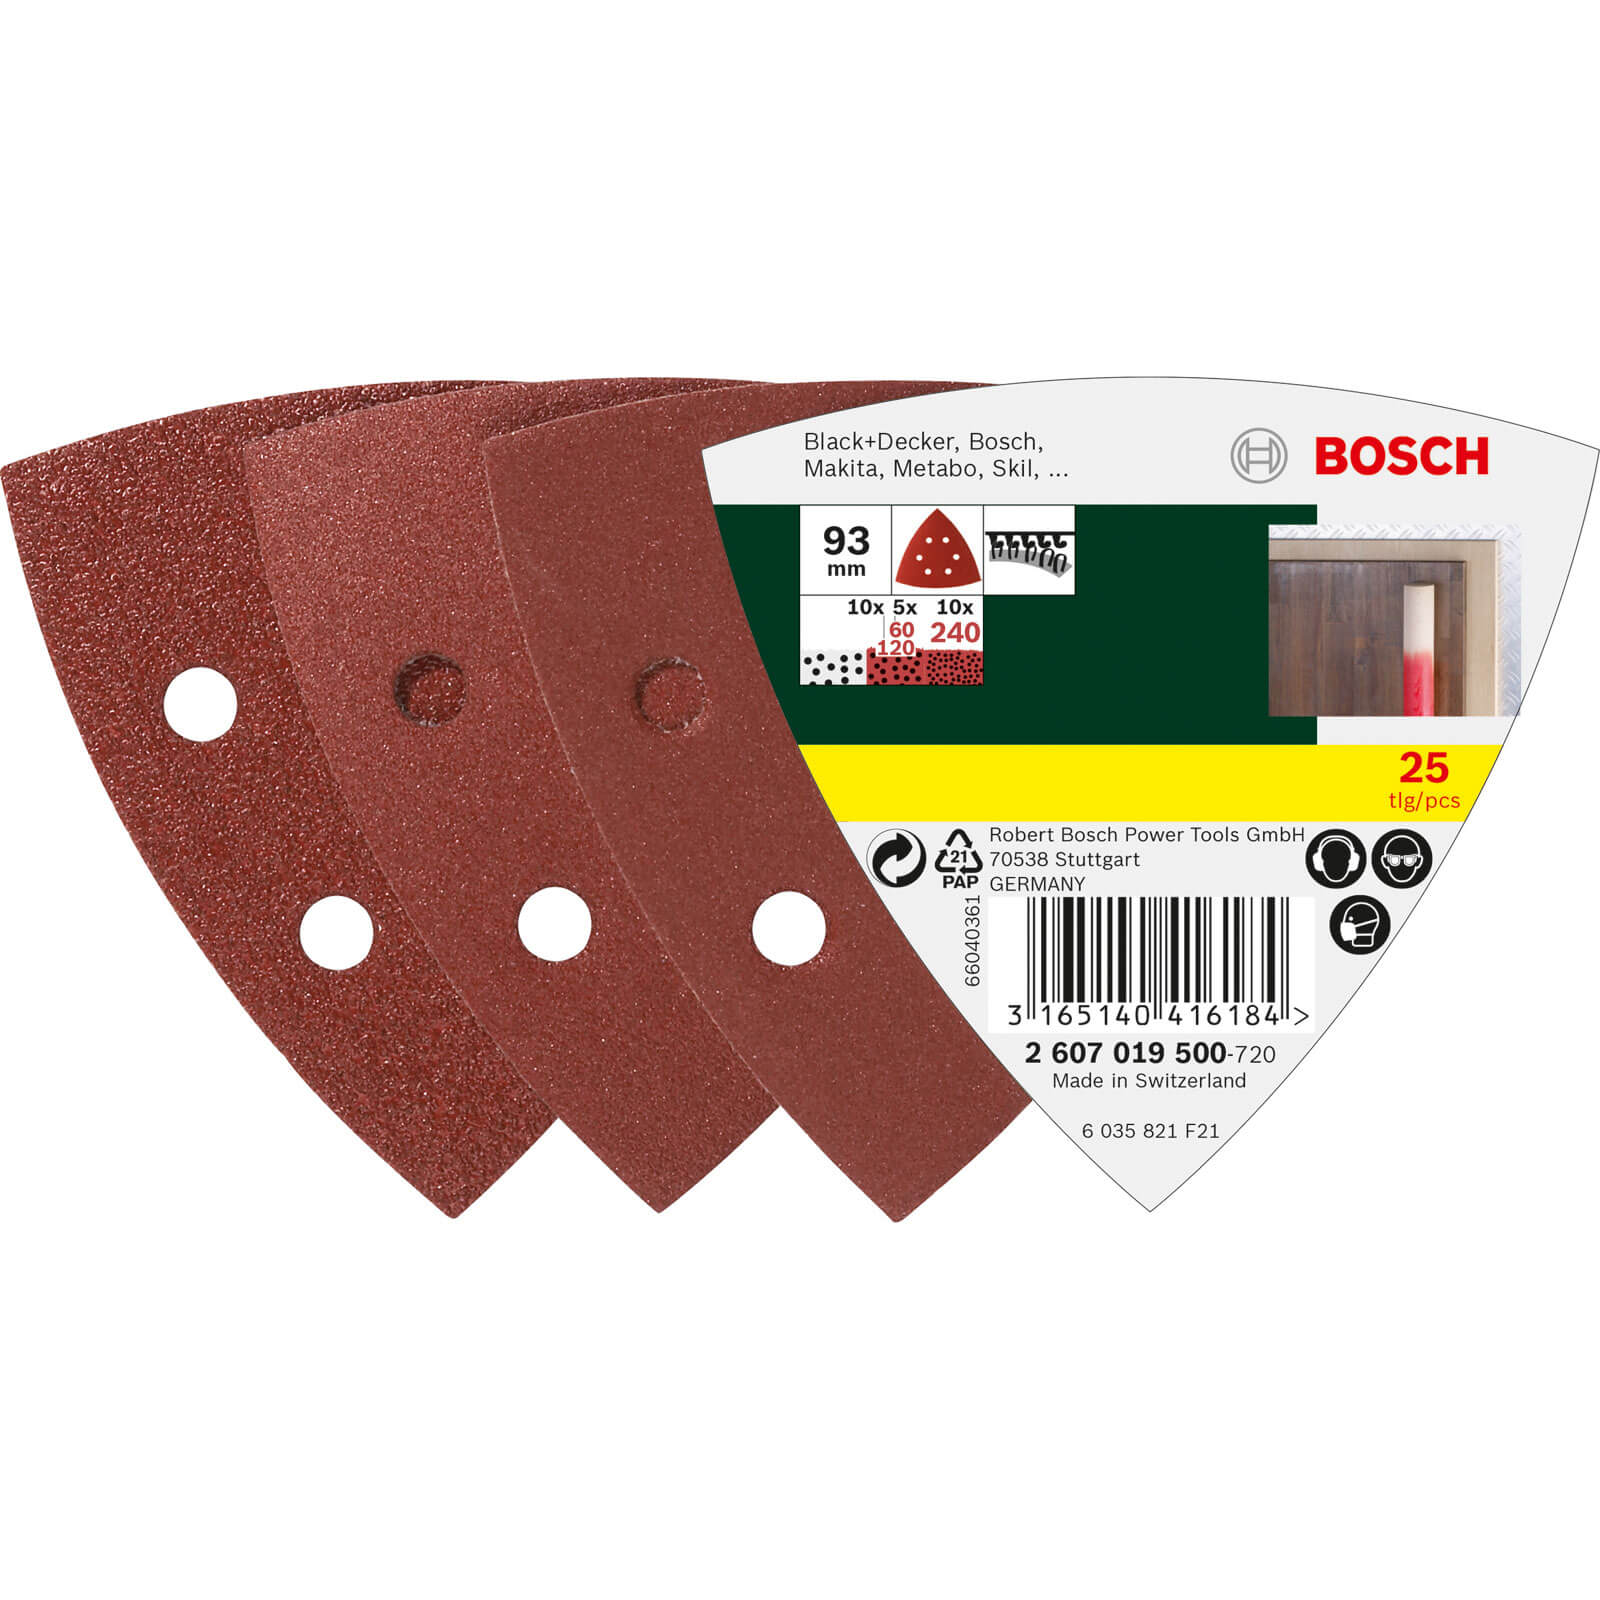 Photo of Bosch Hook And Loop Delta Sanding Sheets 93mm X 93mm Assorted Pack Of 25